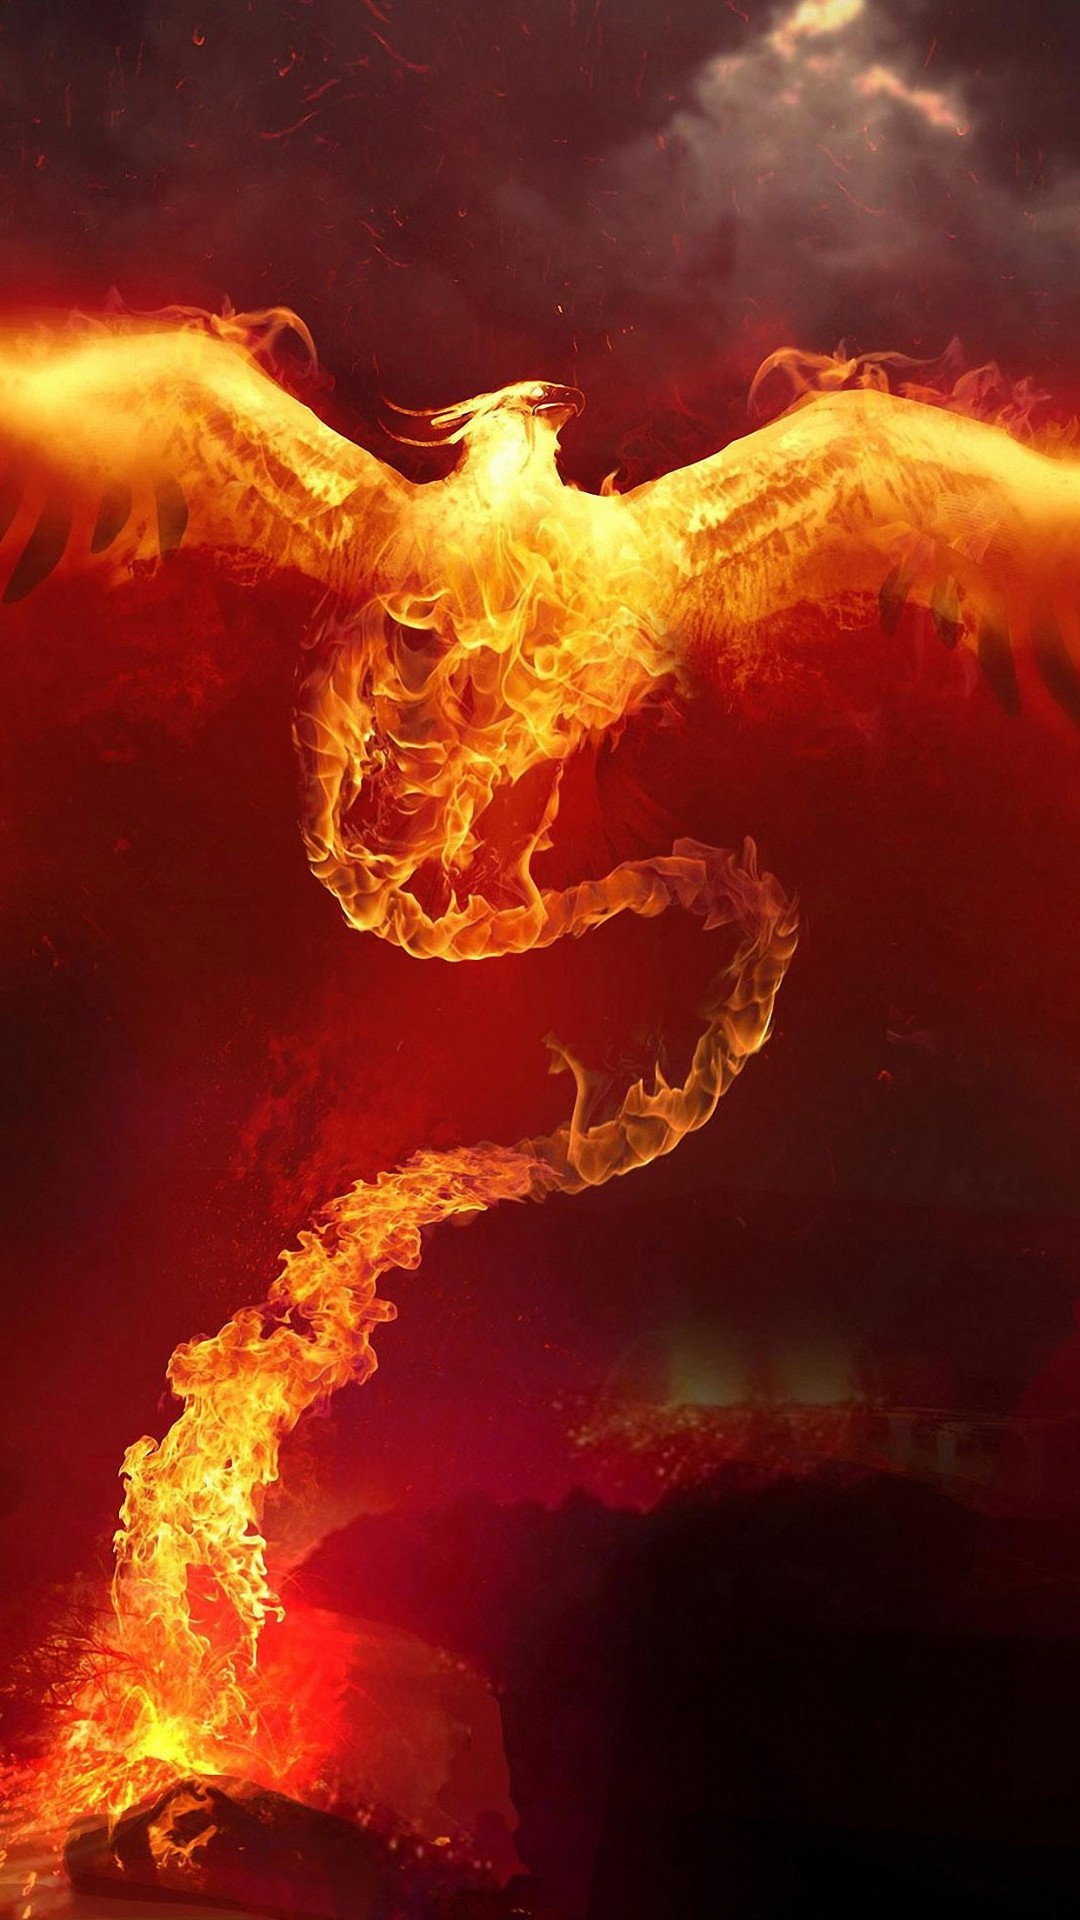 1080x1920, Hd Awesome Fire Phoenix Iphone 6 Plus Wallpapers - Iphone Wallpaper Fire - HD Wallpaper 